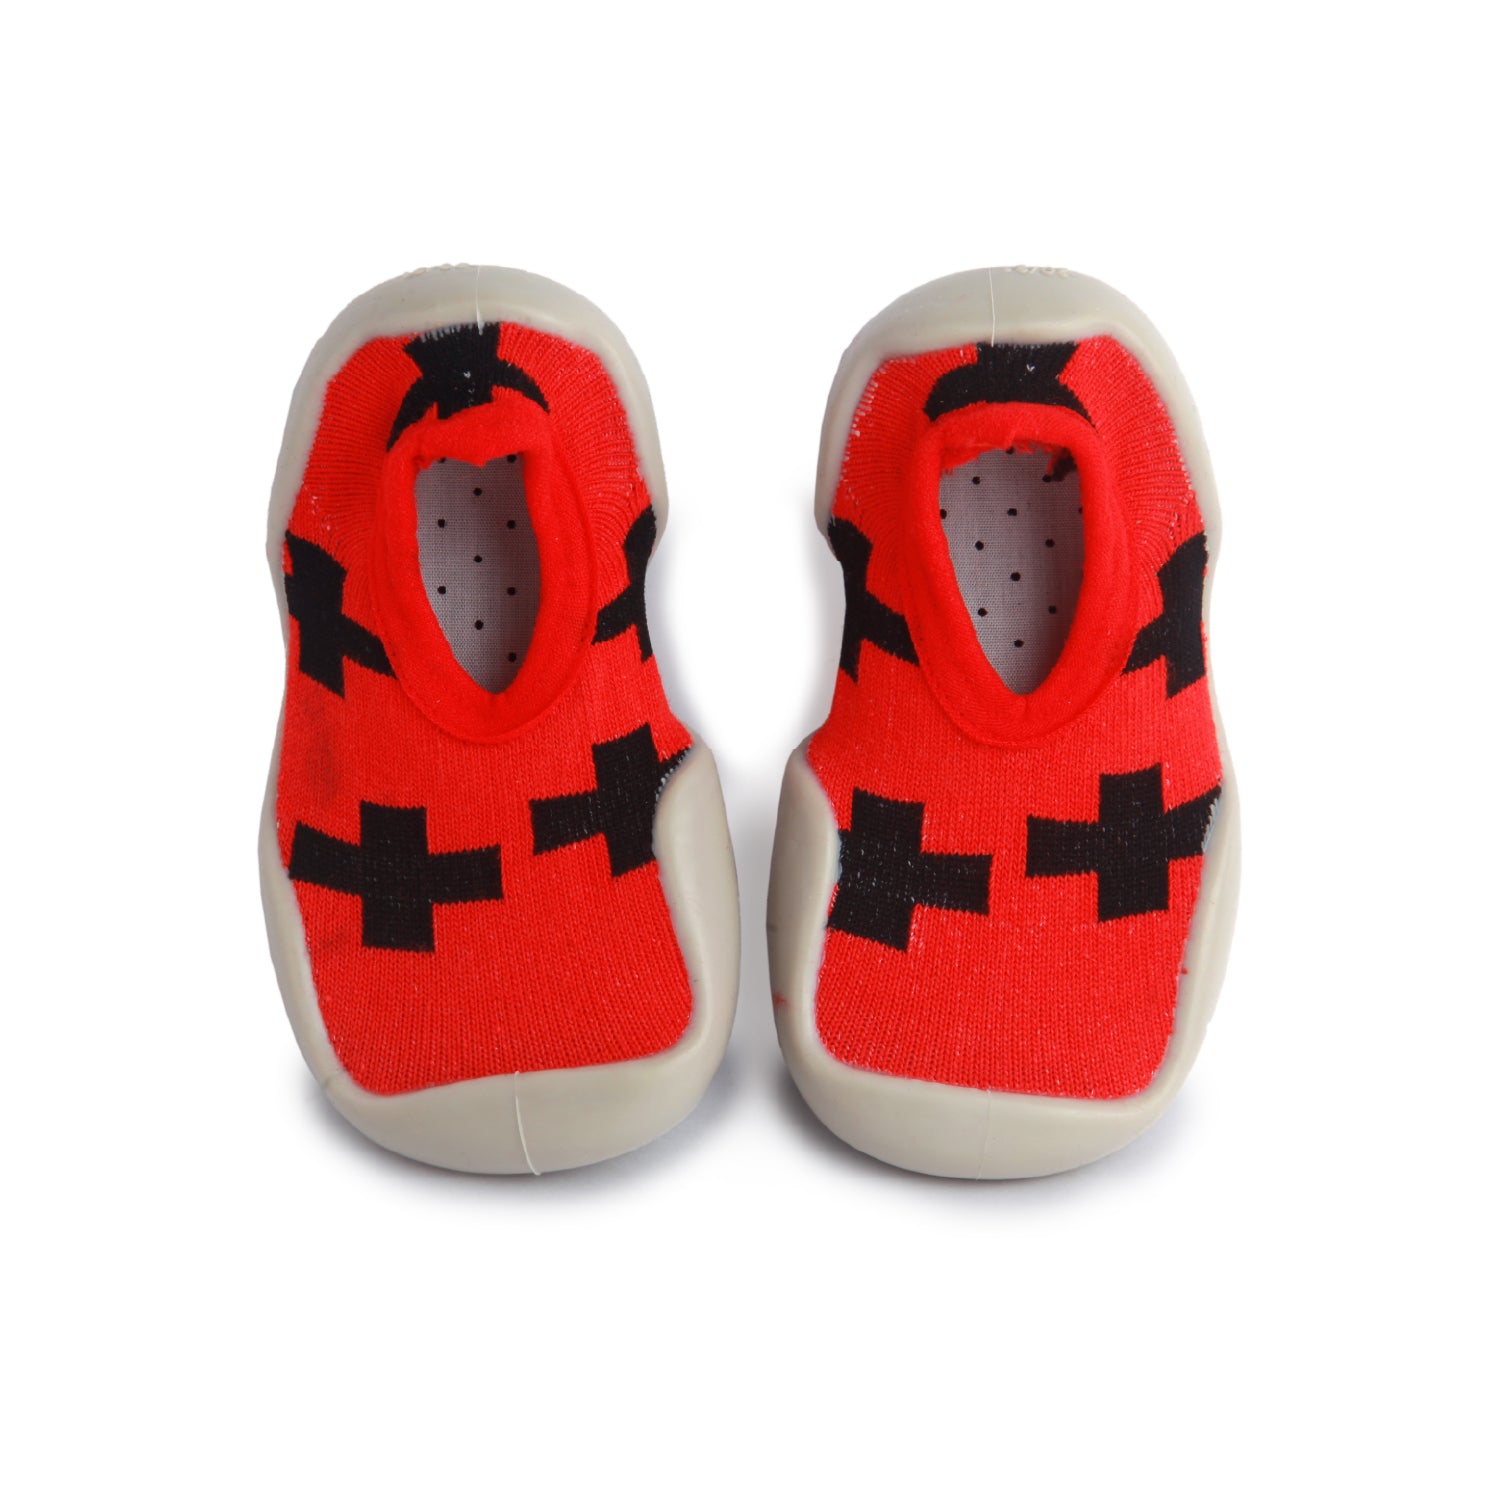 Hot Cross Buns Red Slip-On Shoes - Baby Moo